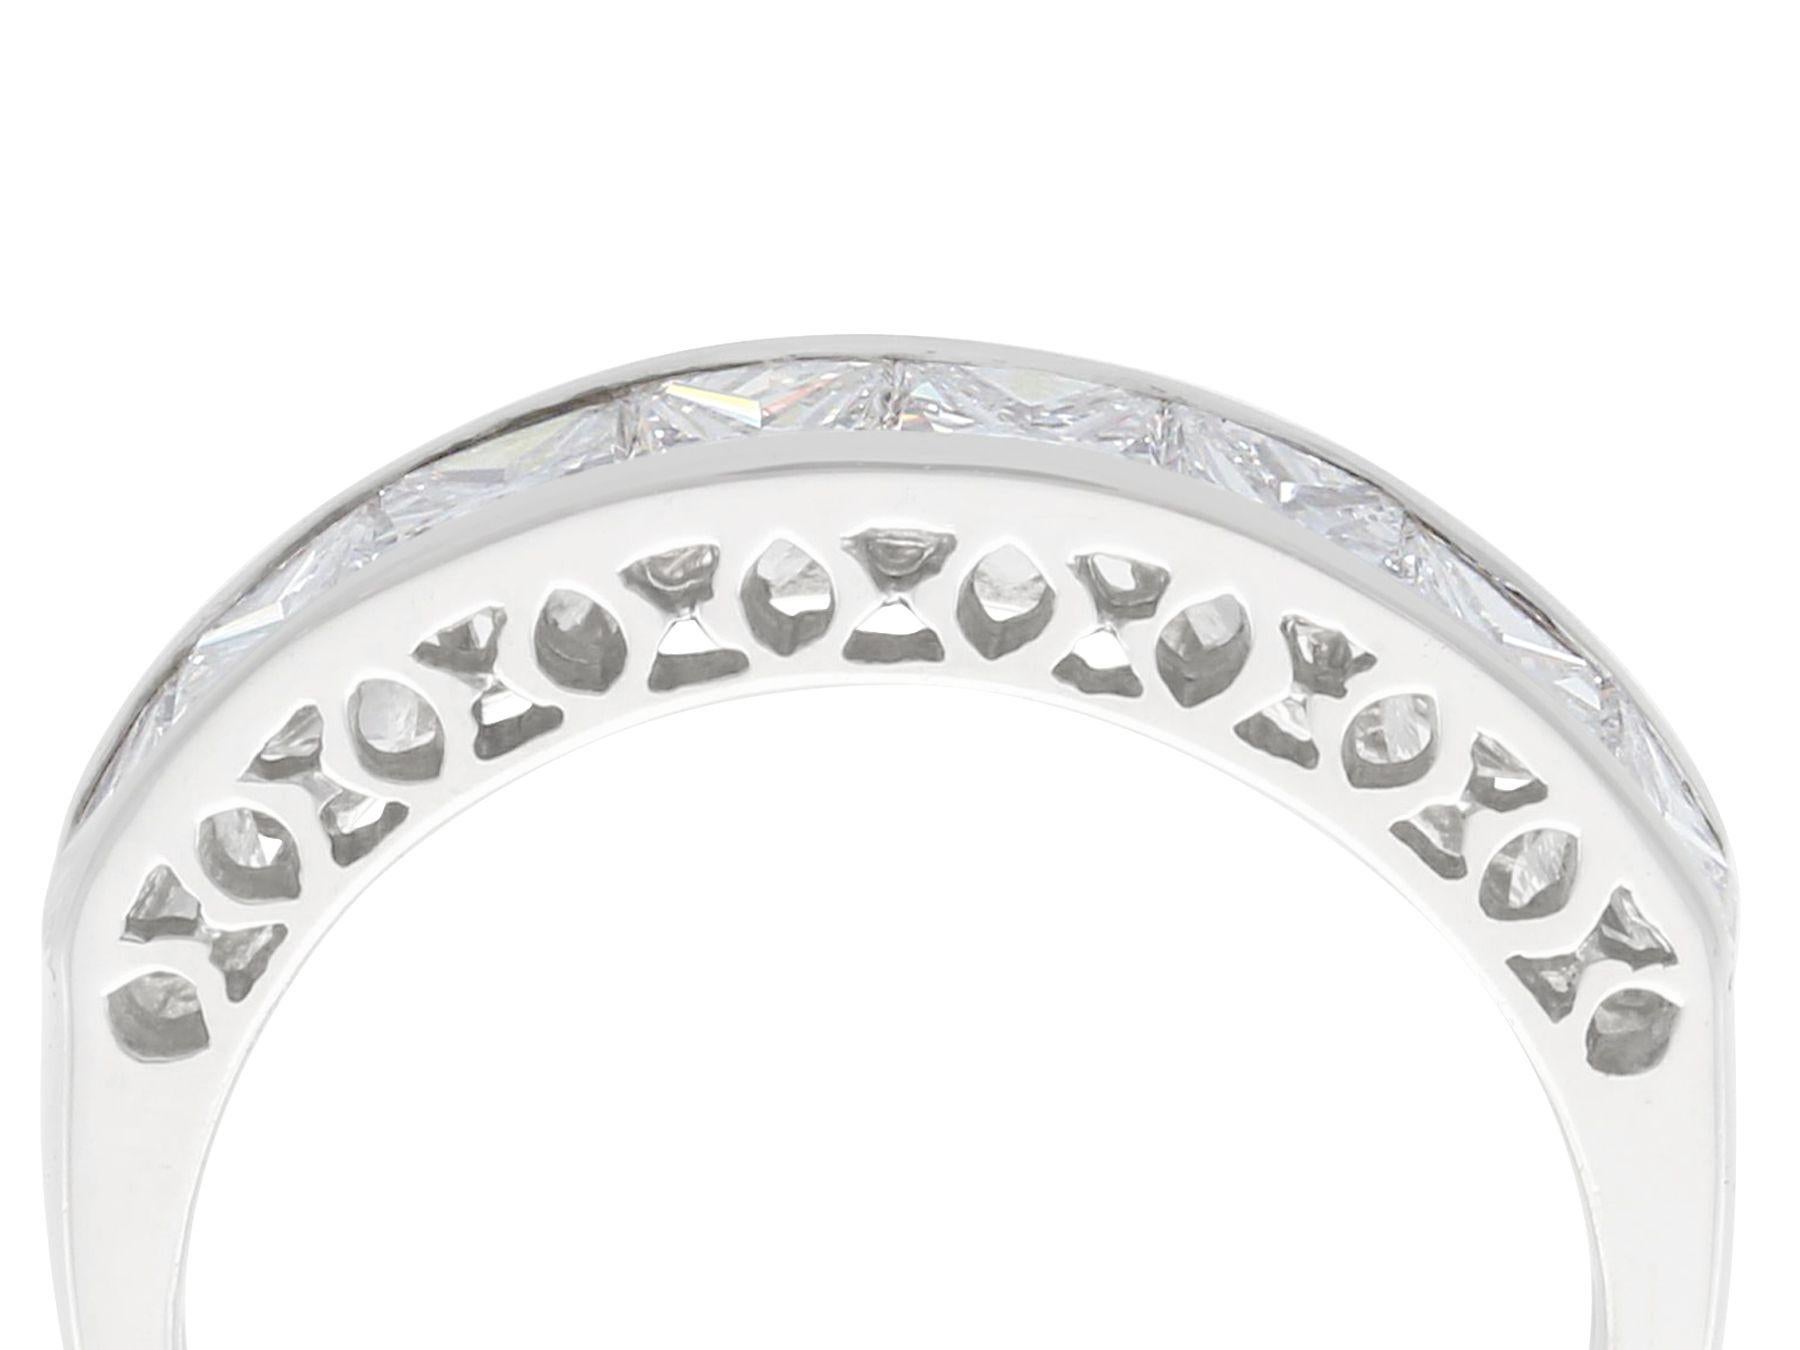 A stunning, fine and impressive contemporary 1.66 carat diamond and platinum half eternity ring; part of our diverse diamond jewelry and estate jewelry collections.

This stunning, fine and impressive contemporary eternity band has been crafted in